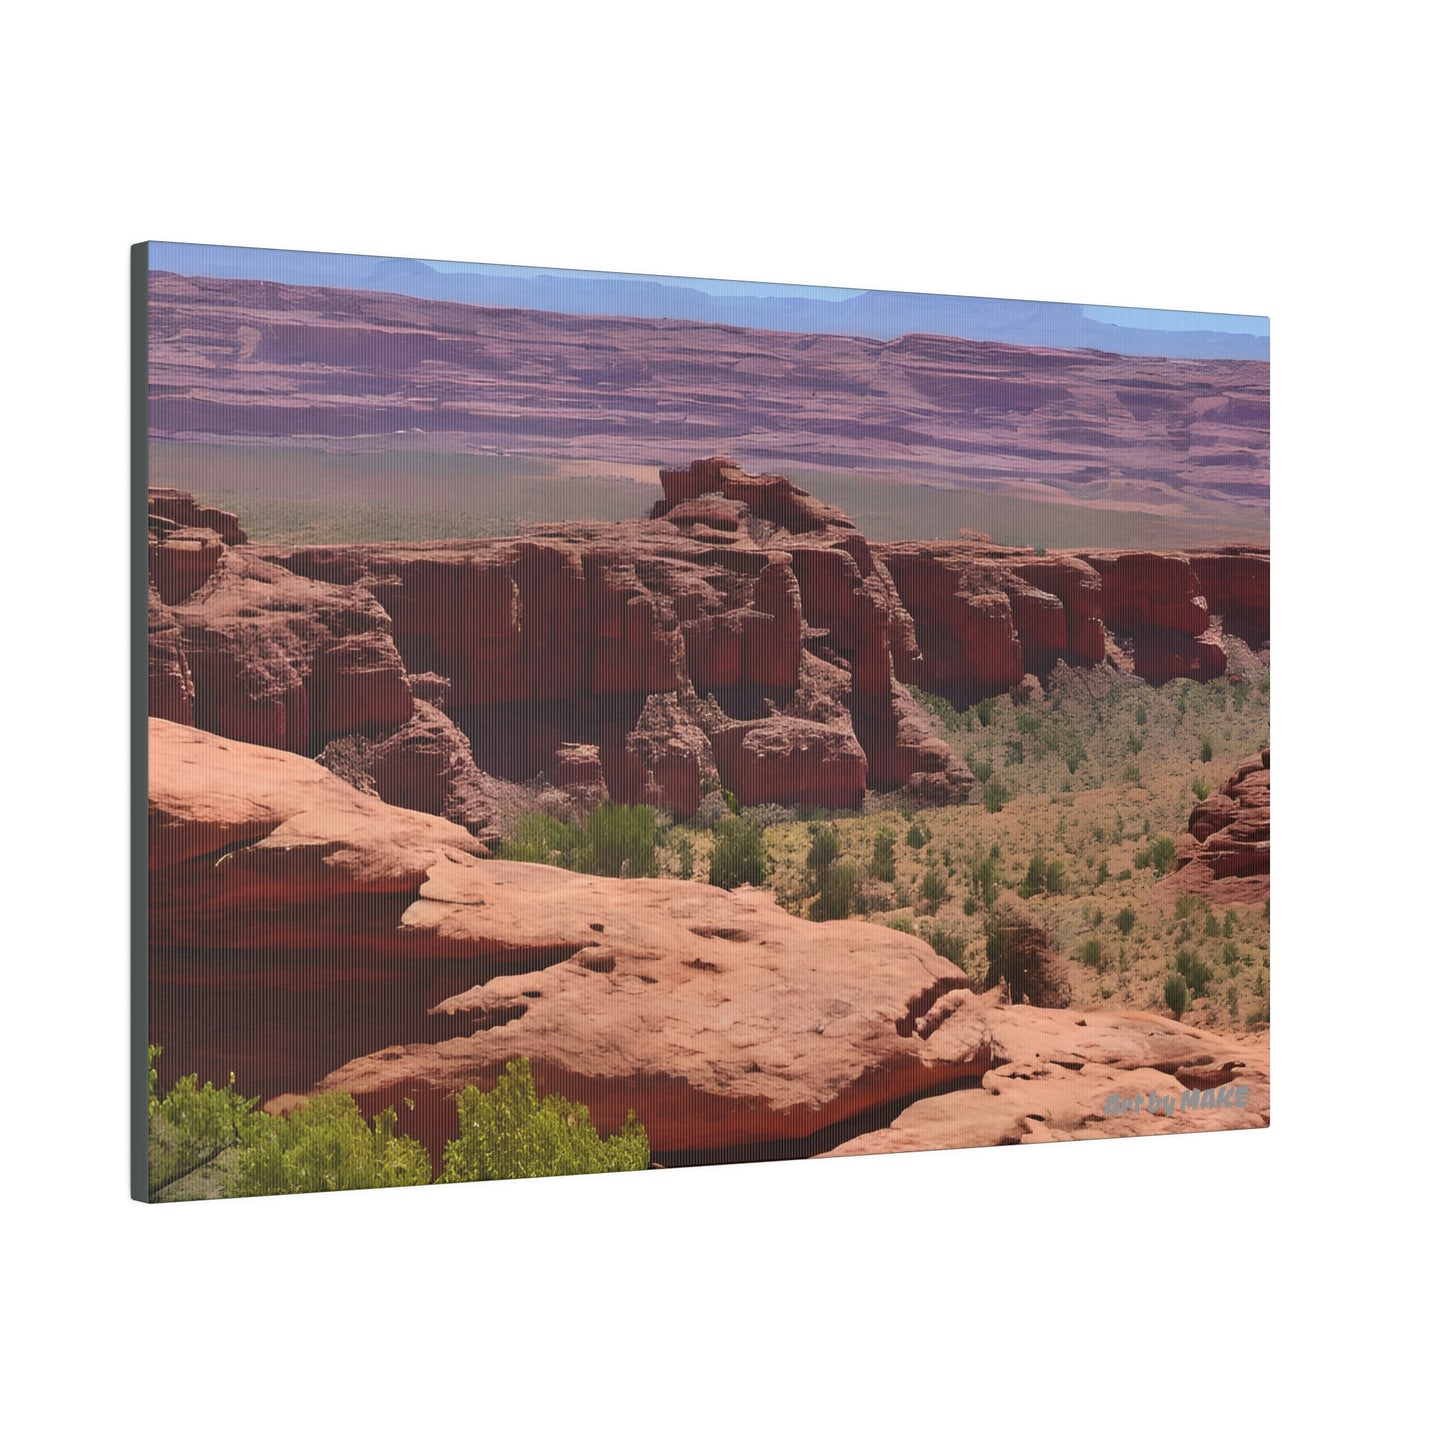 American Valley of the Gods 3 - 24"x16" Matte Canvas, Stretched, 0.75"